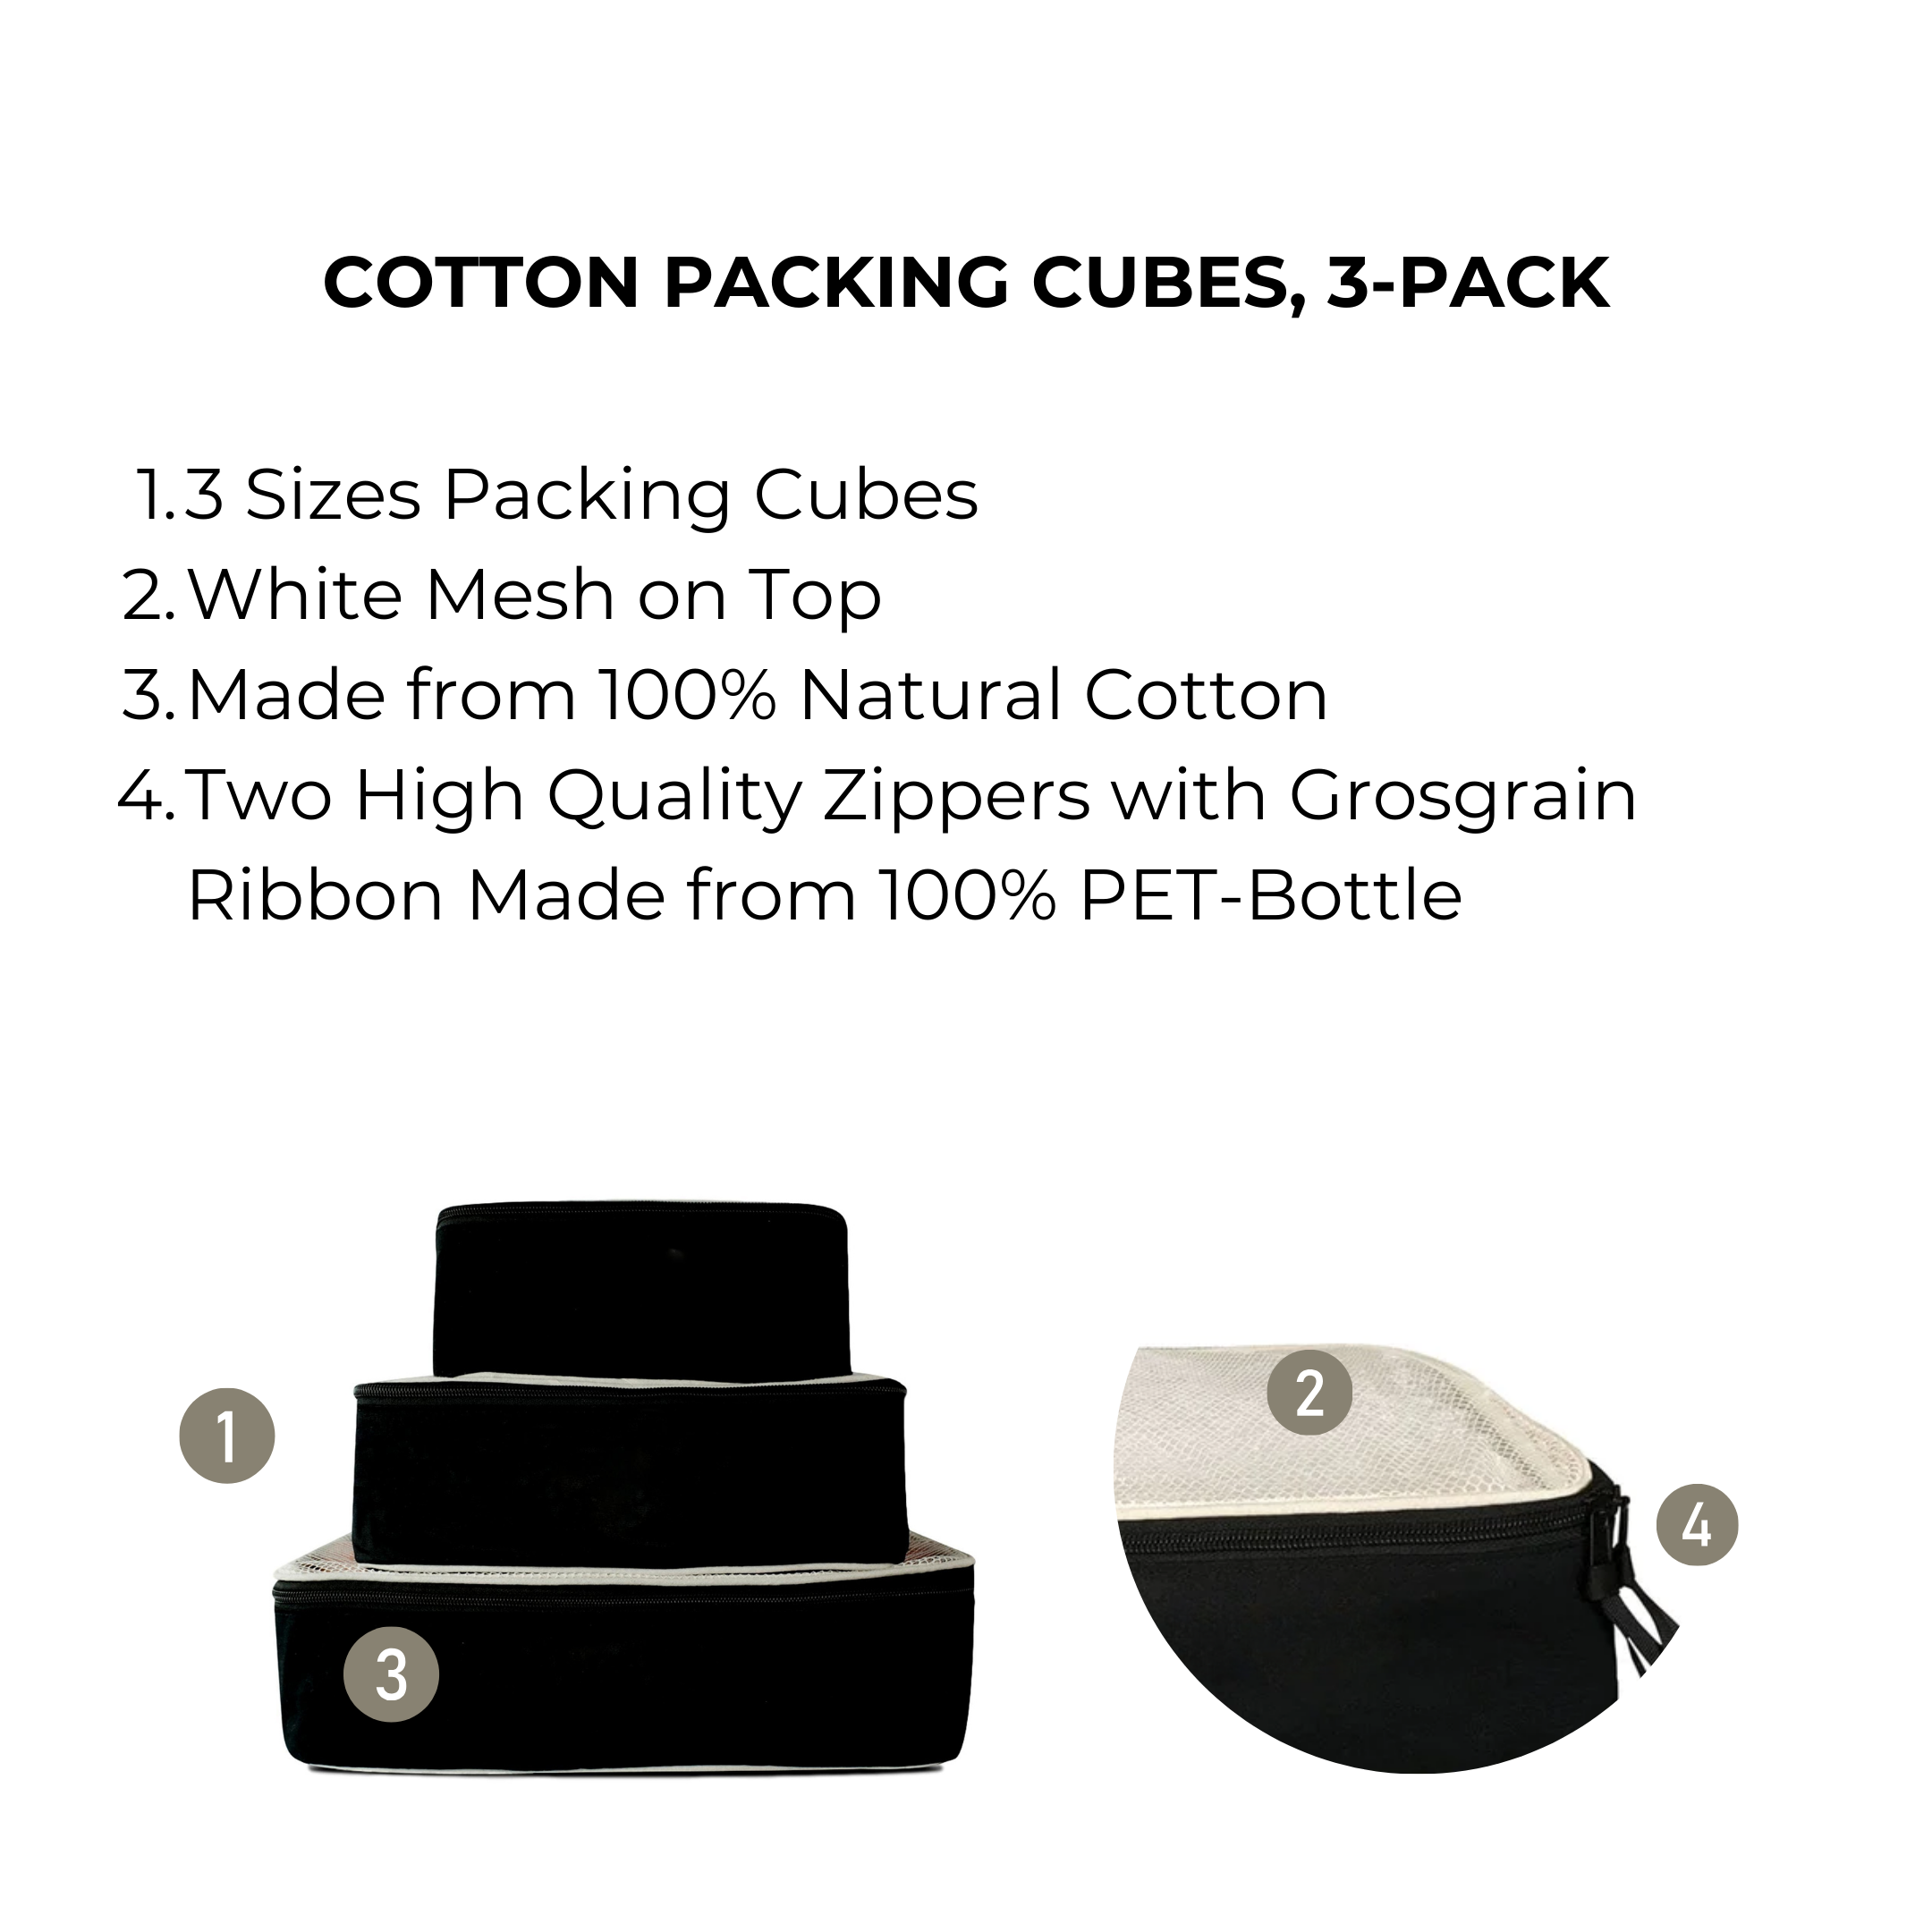 Cotton Packing Cubes, 3-pack Black | Bag-all